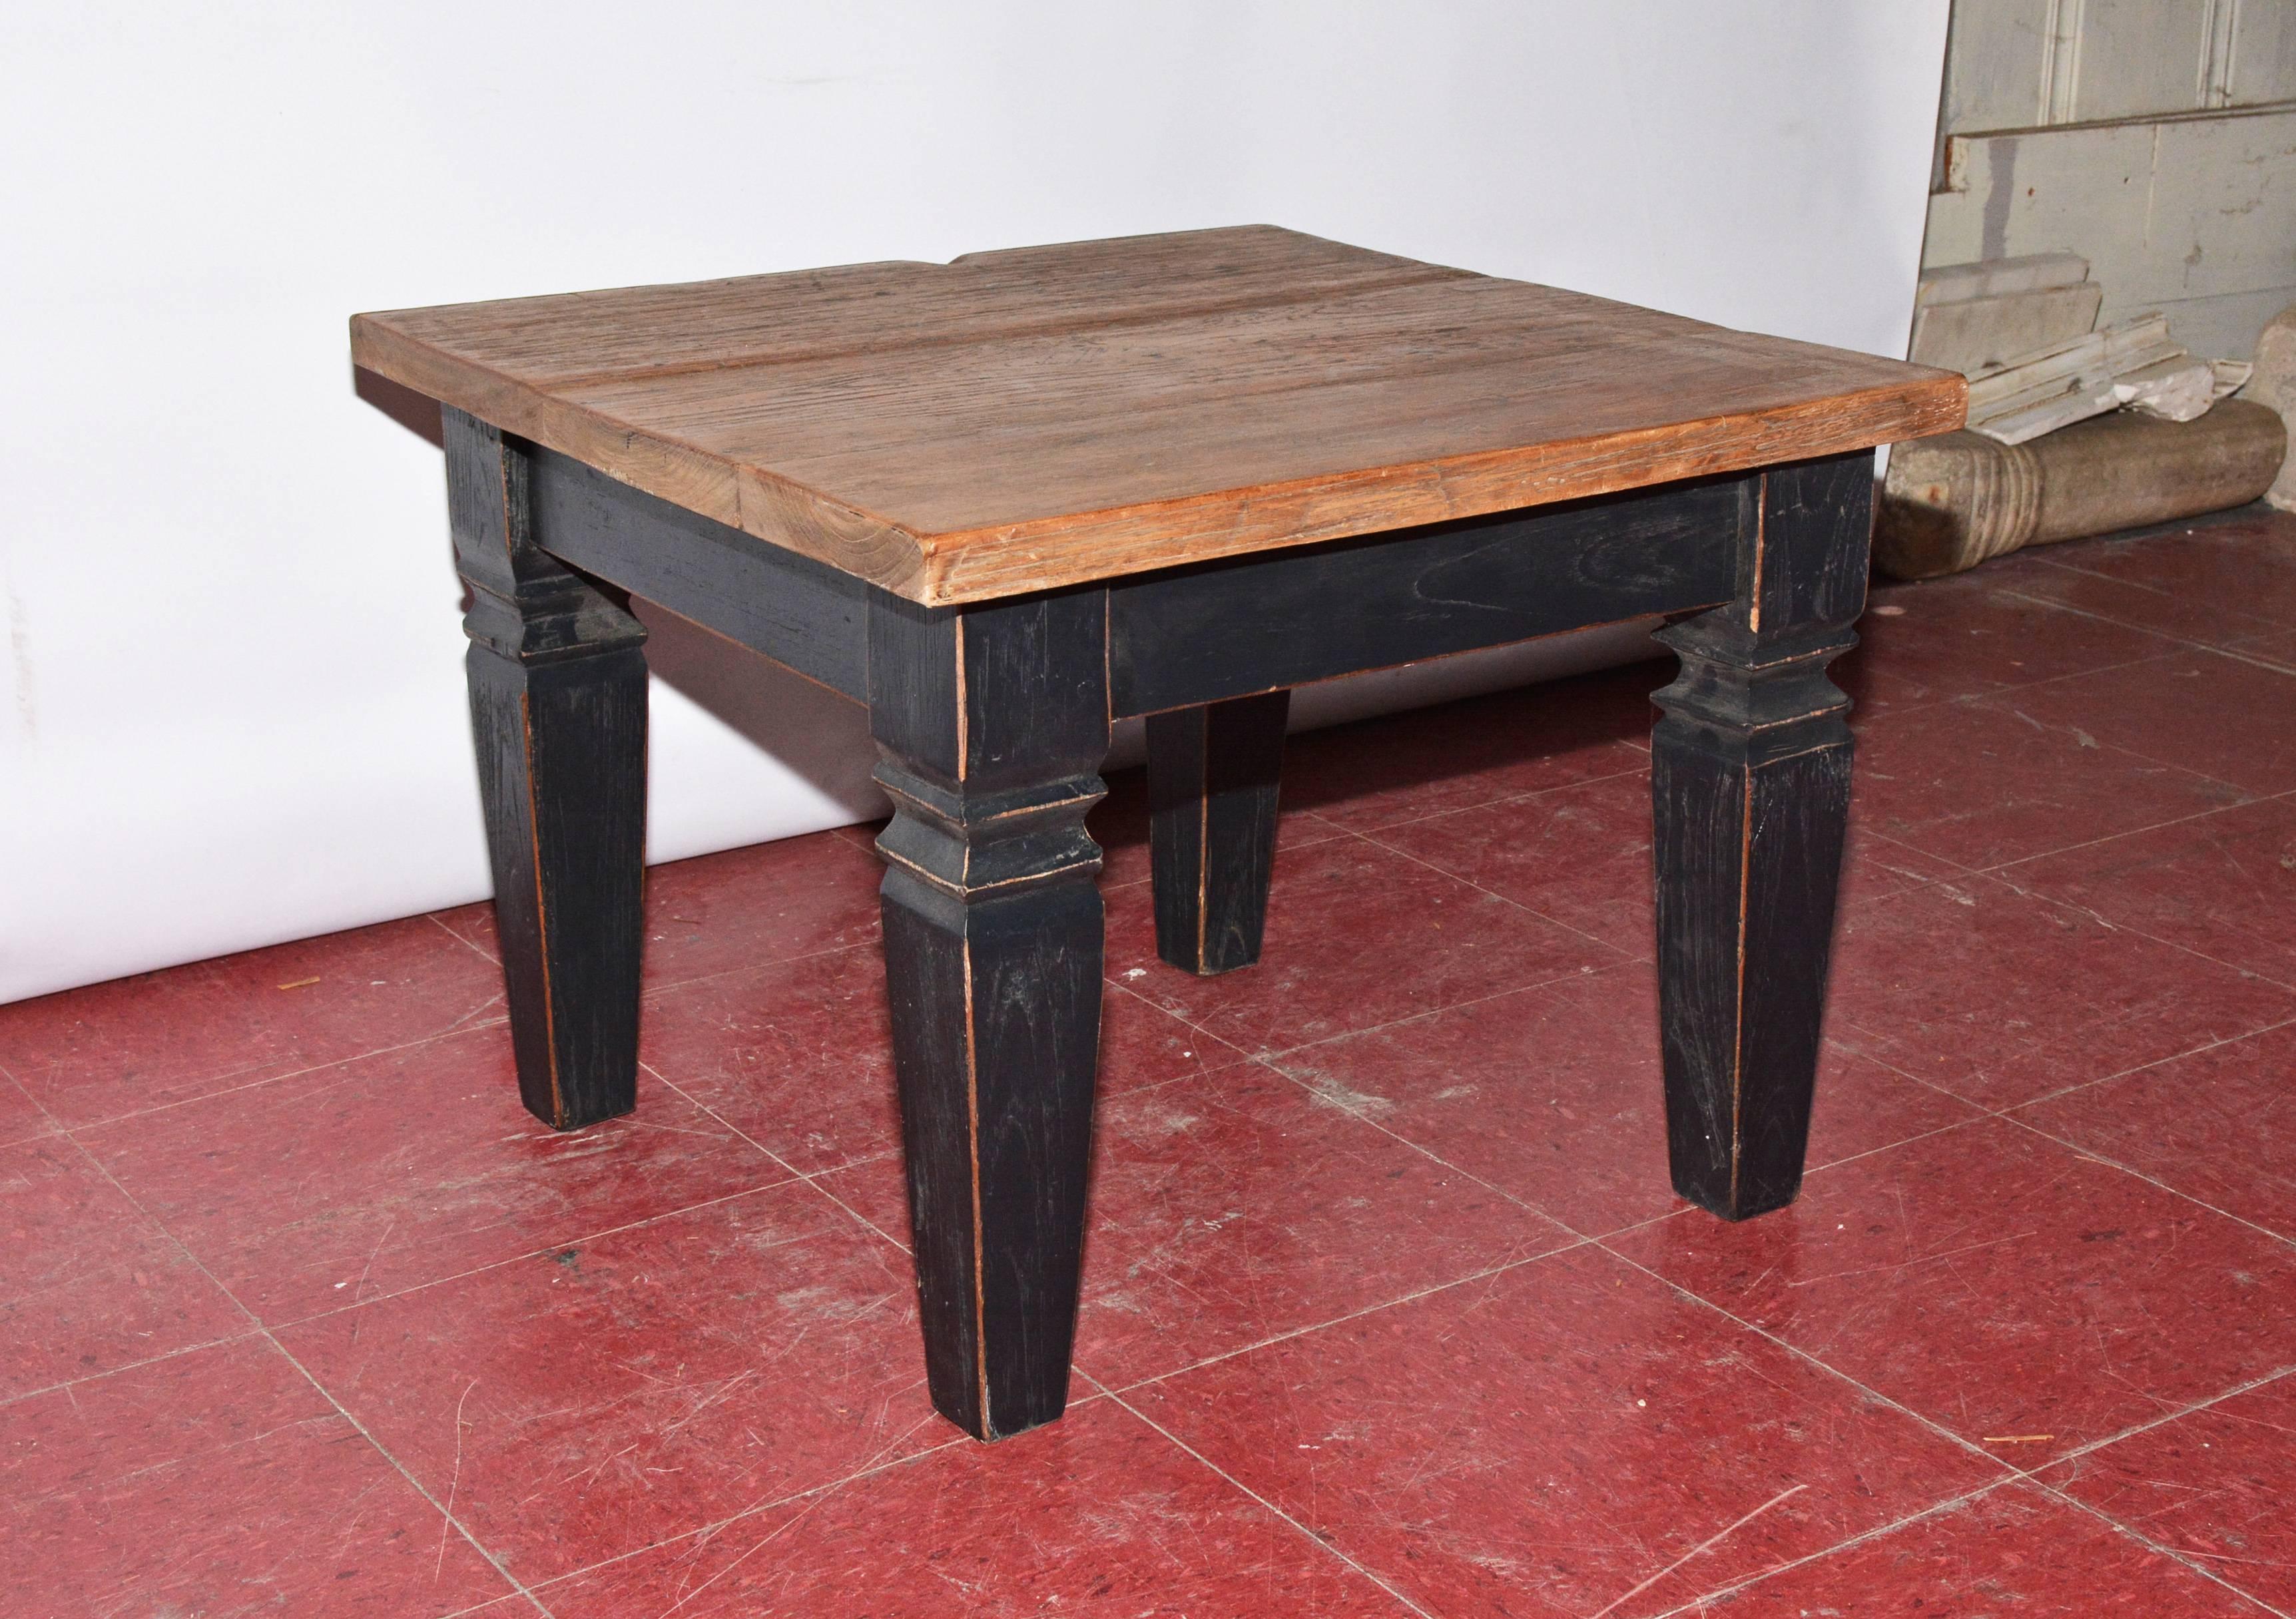 The vintage piece of furniture could be used as an end table or a coffee table. The black stained legs with brown highlighted edges are bolted to the aprons. The brown top has prominent graining. The weight is substantial. No number.